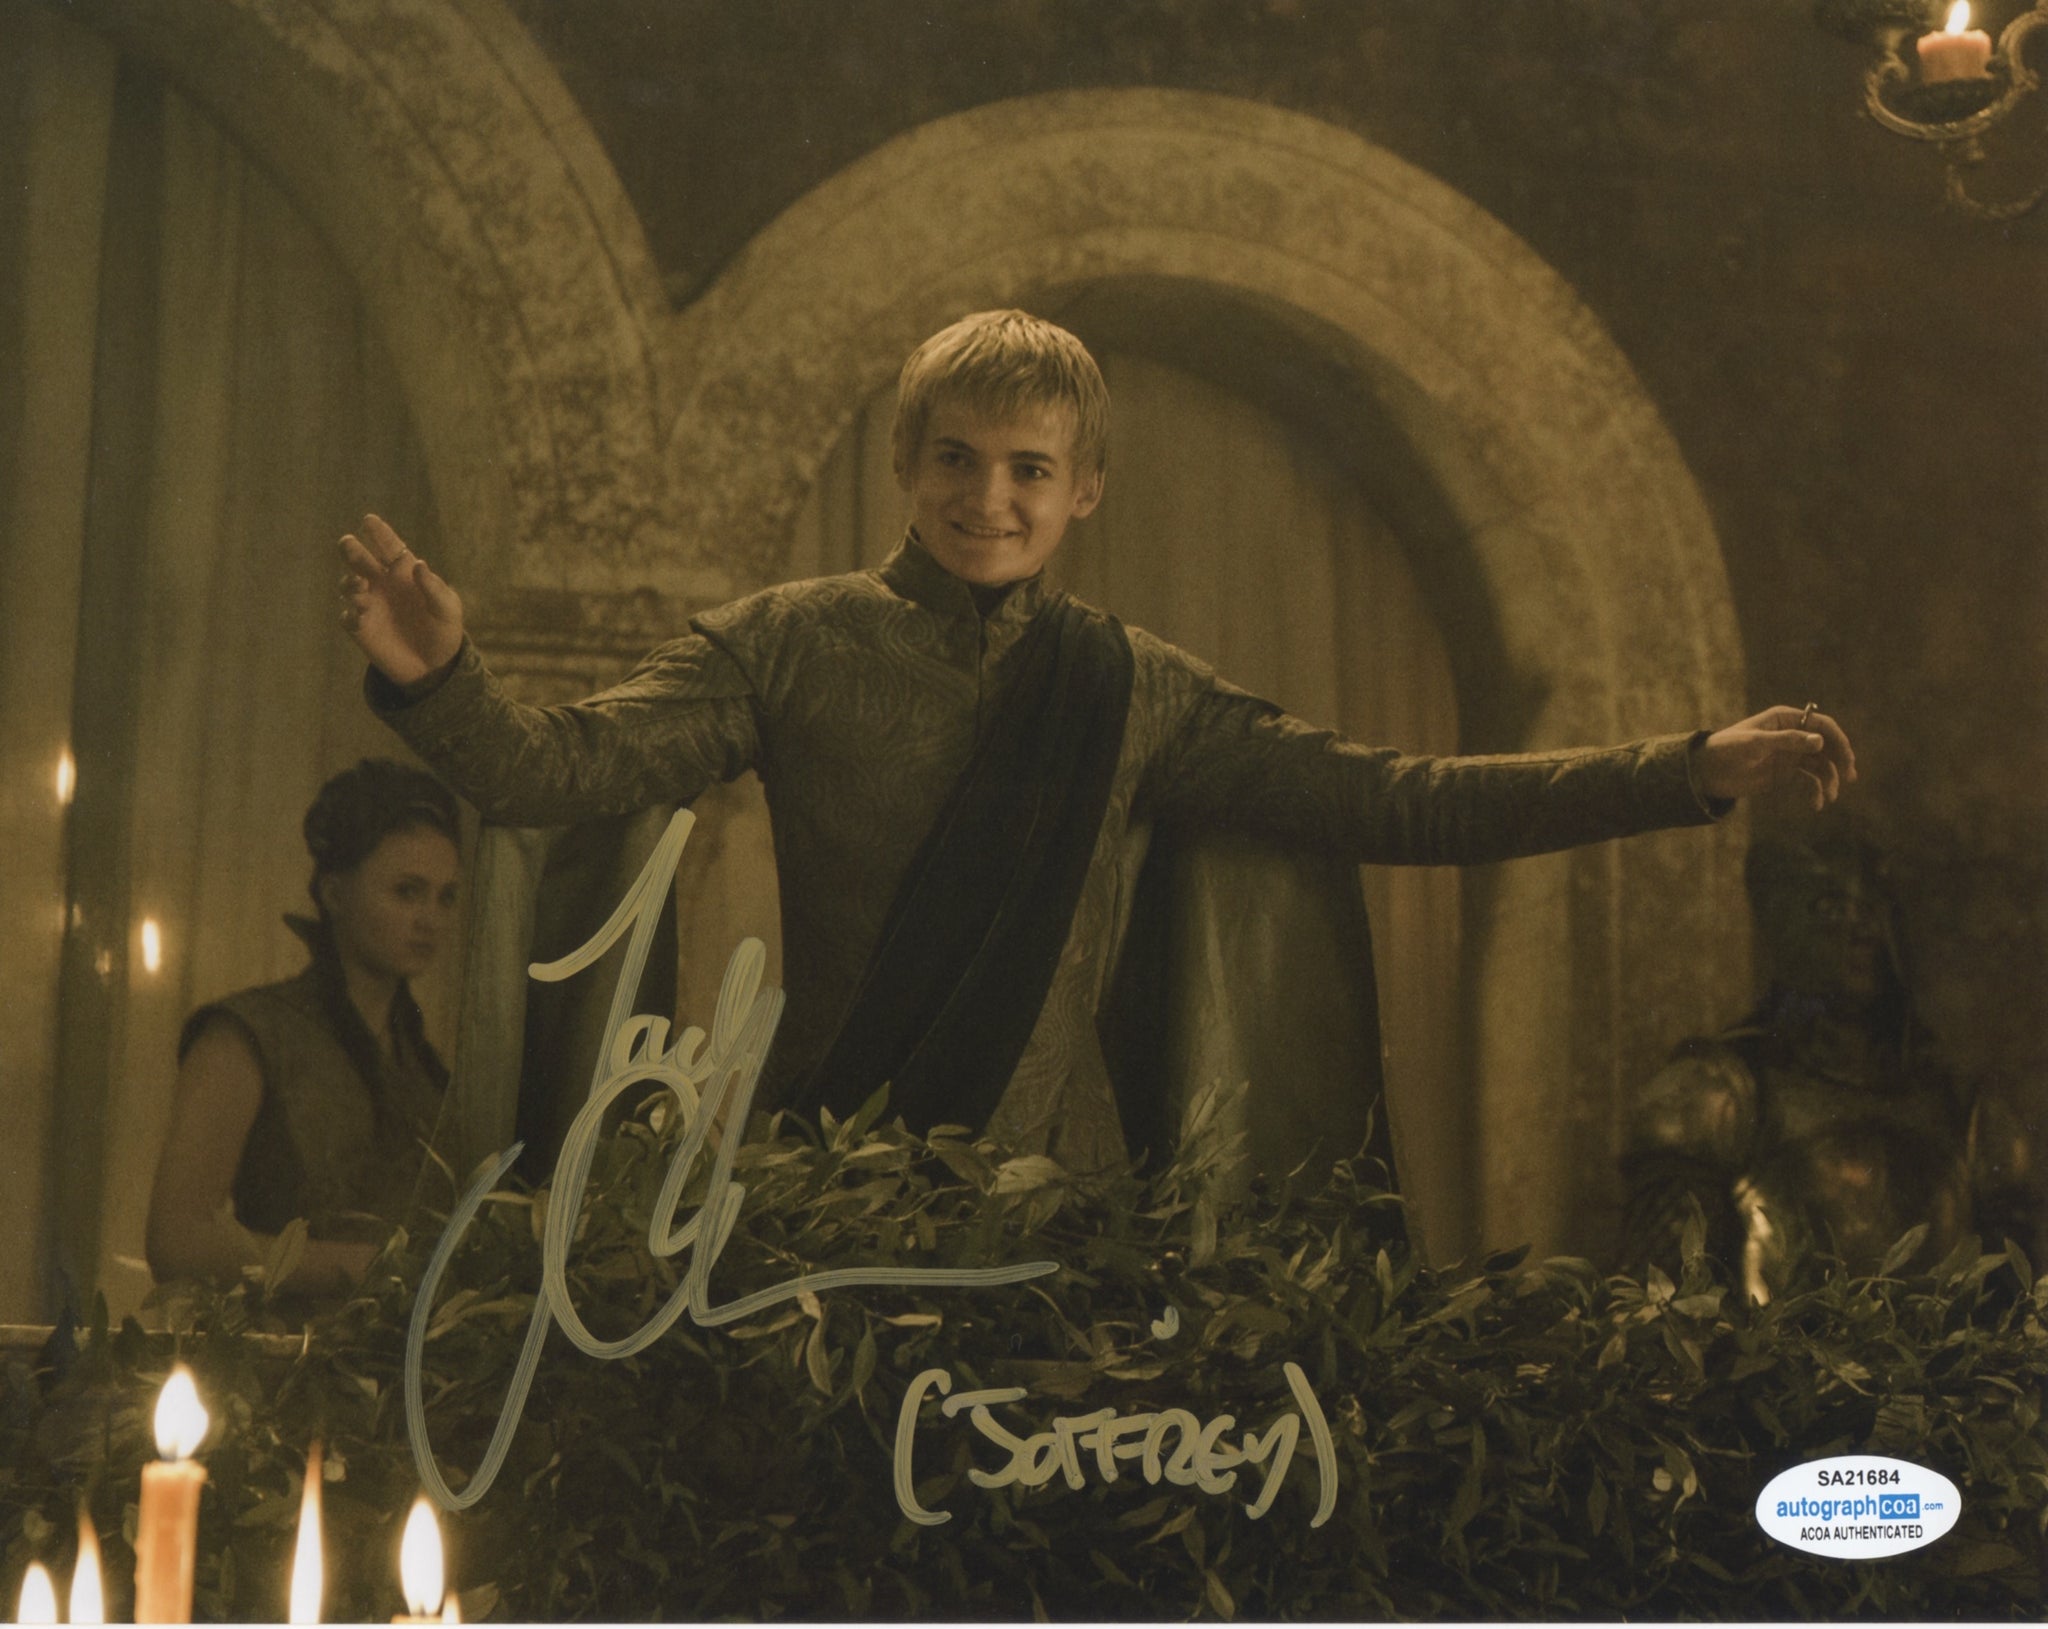 Jack Gleeson Game of Thrones Signed Autograph 8x10 Photo #7 - Outlaw Hobbies Authentic Autographs